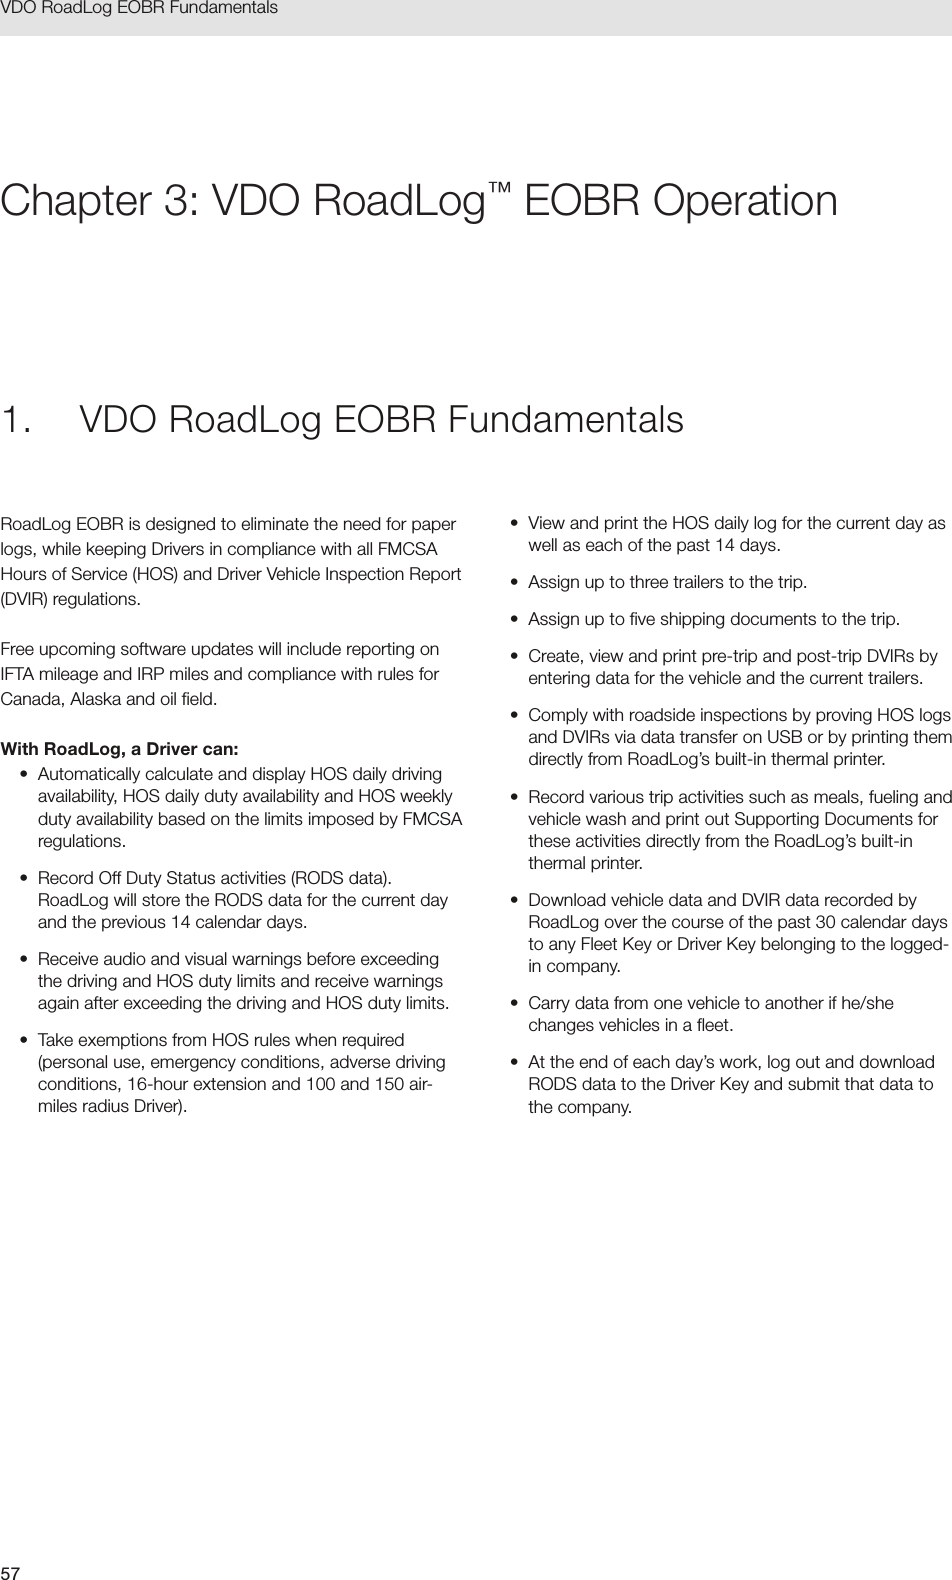 57VDO RoadLog EOBR Fundamentals 1.  VDO RoadLog EOBR FundamentalsRoadLog EOBR is designed to eliminate the need for paper logs, while keeping Drivers in compliance with all FMCSA Hours of Service (HOS) and Driver Vehicle Inspection Report (DVIR) regulations. Free upcoming software updates will include reporting on IFTA mileage and IRP miles and compliance with rules for Canada, Alaska and oil field.With RoadLog, a Driver can:•  Automatically calculate and display HOS daily driving availability, HOS daily duty availability and HOS weekly duty availability based on the limits imposed by FMCSA regulations.•  Record Off Duty Status activities (RODS data). RoadLog will store the RODS data for the current day and the previous 14 calendar days. •  Receive audio and visual warnings before exceeding the driving and HOS duty limits and receive warnings again after exceeding the driving and HOS duty limits.•  Take exemptions from HOS rules when required (personal use, emergency conditions, adverse driving conditions, 16-hour extension and 100 and 150 air-miles radius Driver).•  View and print the HOS daily log for the current day as well as each of the past 14 days.•  Assign up to three trailers to the trip.•  Assign up to five shipping documents to the trip.•  Create, view and print pre-trip and post-trip DVIRs by entering data for the vehicle and the current trailers.•  Comply with roadside inspections by proving HOS logs and DVIRs via data transfer on USB or by printing them directly from RoadLog’s built-in thermal printer.•  Record various trip activities such as meals, fueling and vehicle wash and print out Supporting Documents for these activities directly from the RoadLog’s built-in thermal printer.•  Download vehicle data and DVIR data recorded by RoadLog over the course of the past 30 calendar days to any Fleet Key or Driver Key belonging to the logged-in company.•  Carry data from one vehicle to another if he/she changes vehicles in a fleet.•  At the end of each day’s work, log out and download RODS data to the Driver Key and submit that data to the company.Chapter 3: VDO RoadLog™ EOBR Operation